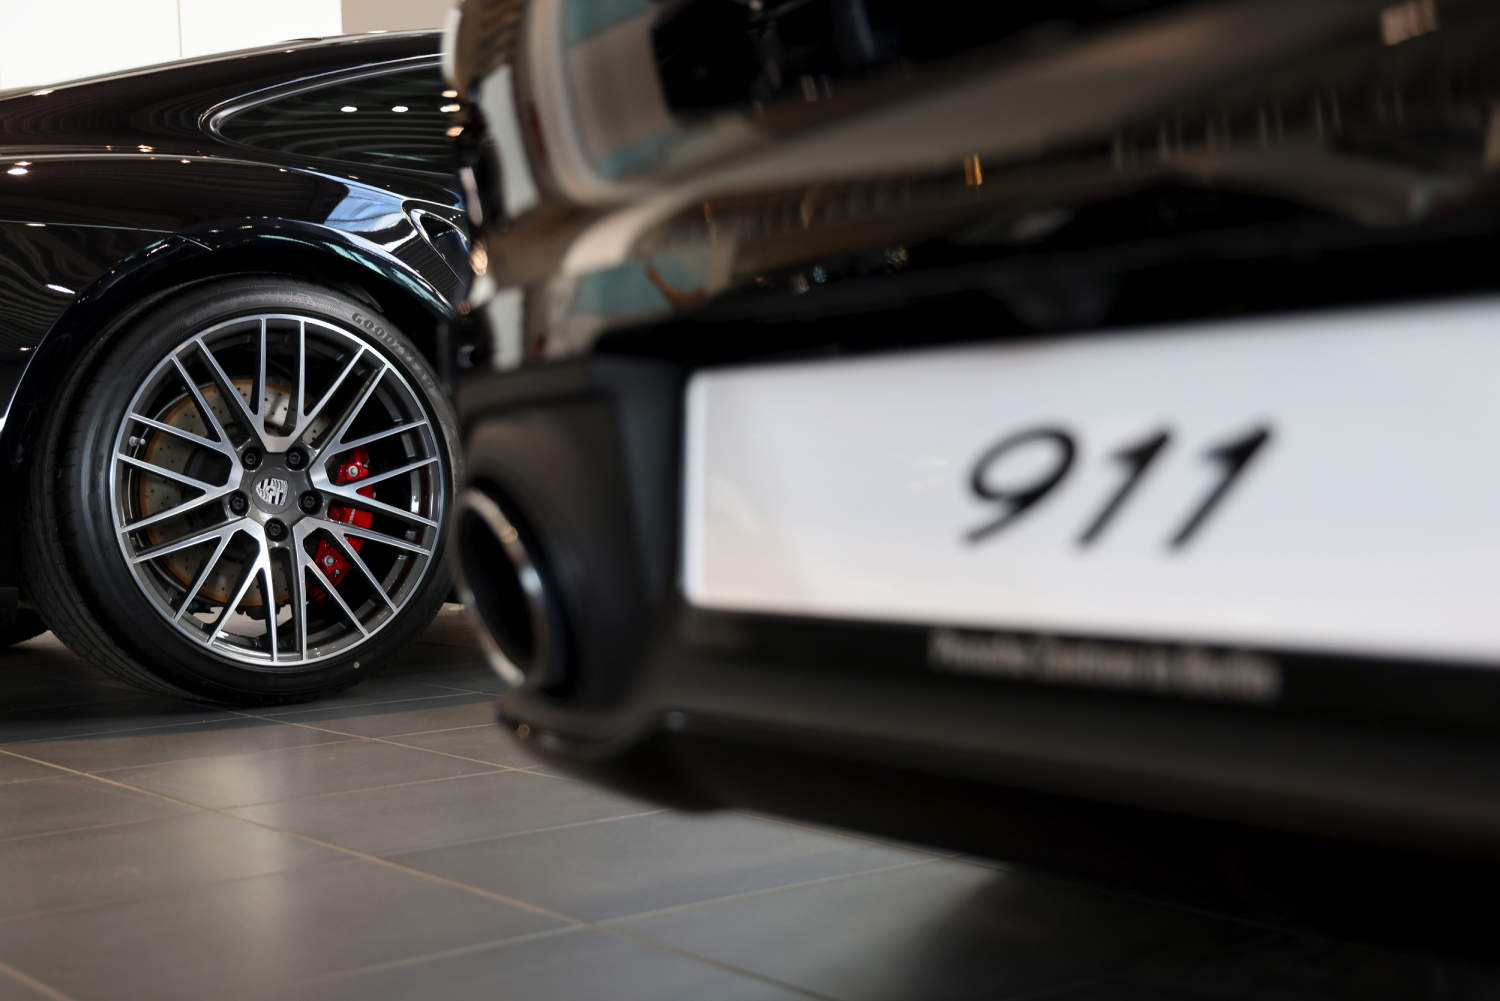 Two black 2021 Porsche 911 cars on display in a showroom